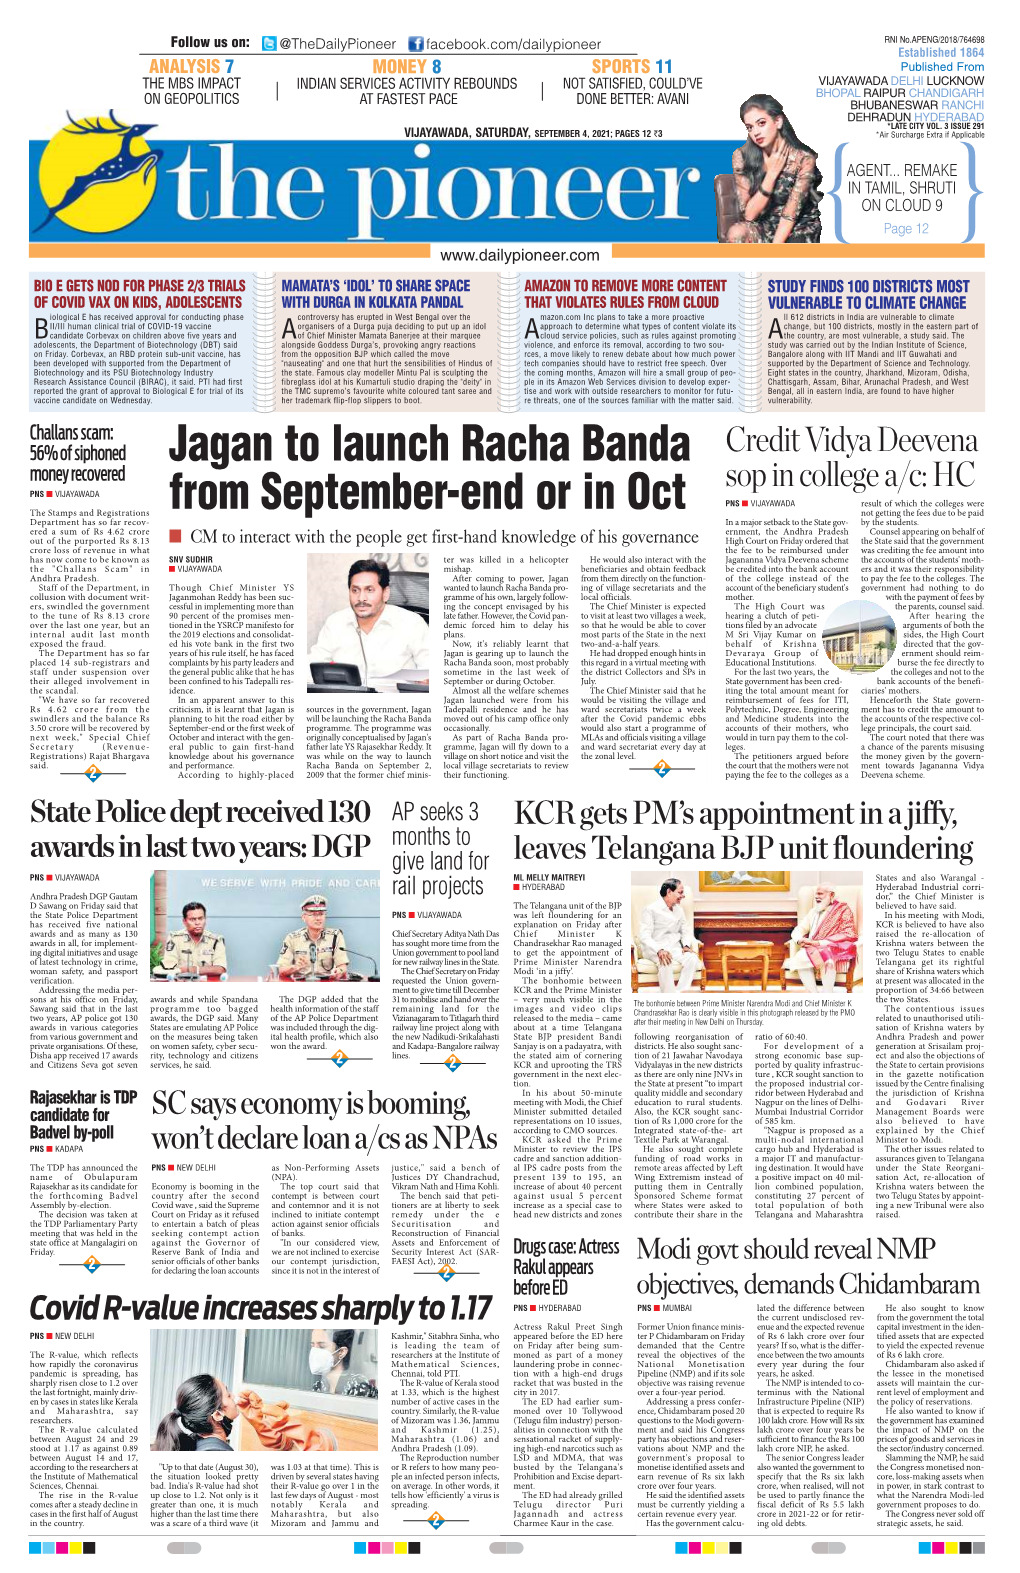 Jagan to Launch Racha Banda from September-End Or In